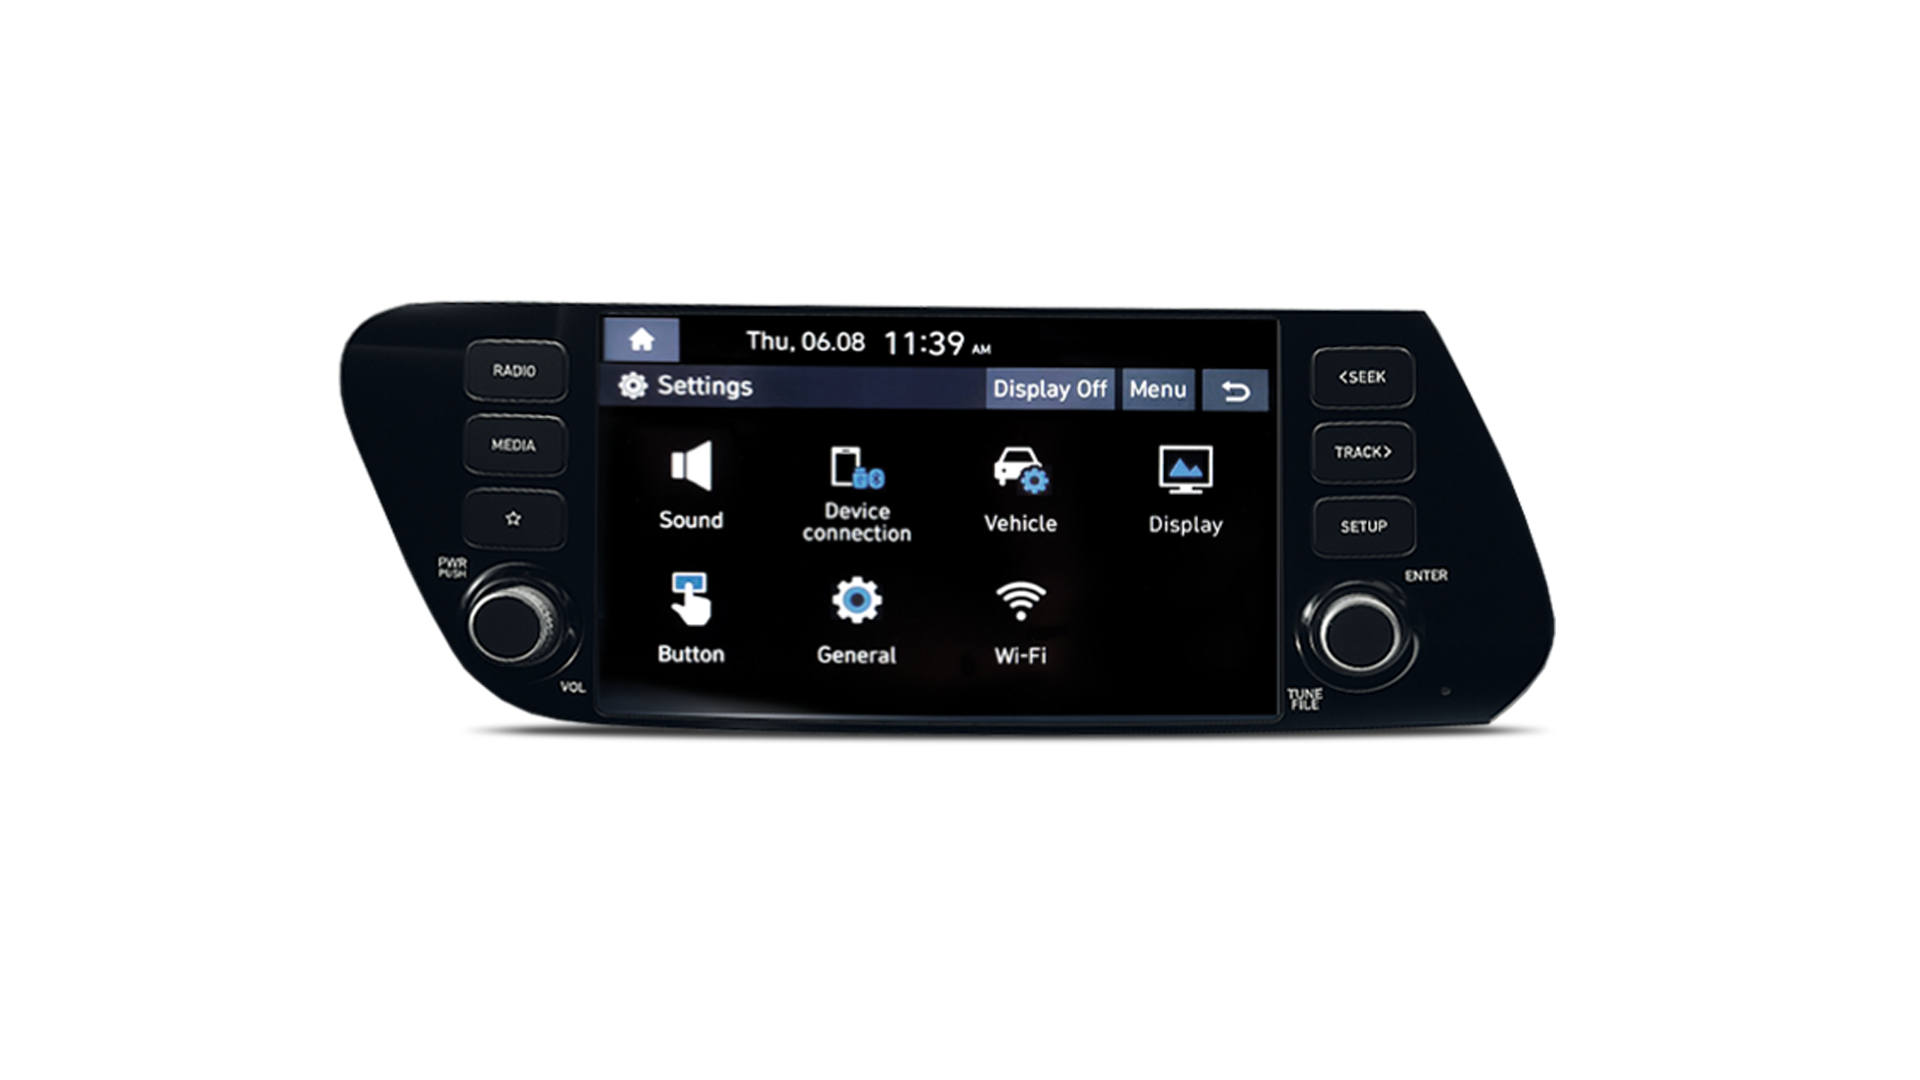 The Hyundai i20's 8 inch centre touch screen